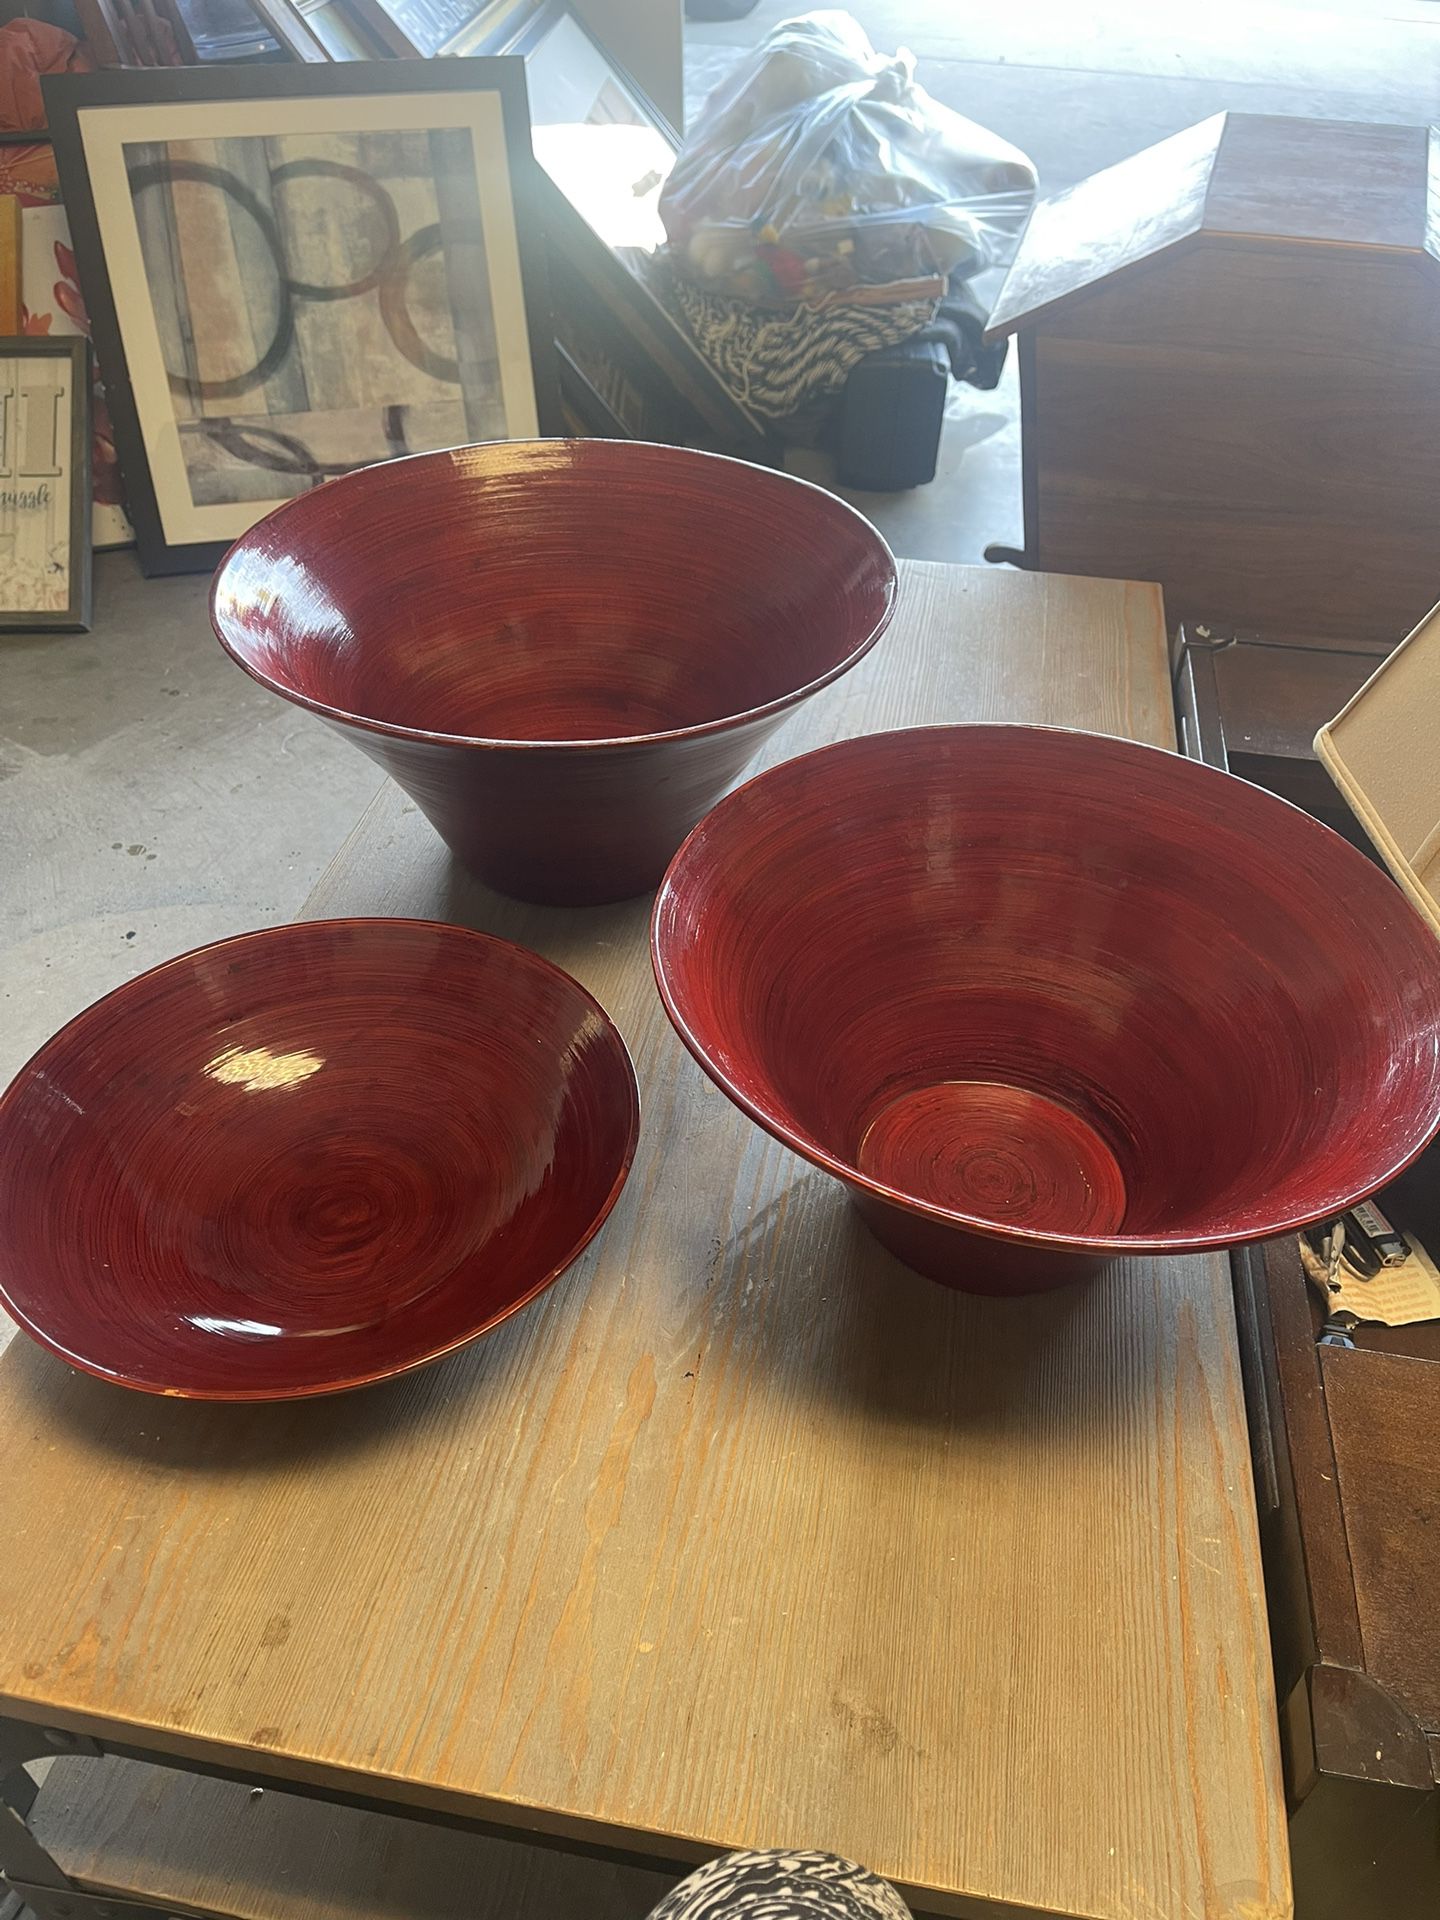 Three Decorative Handcrafted Bowls From Vietnam